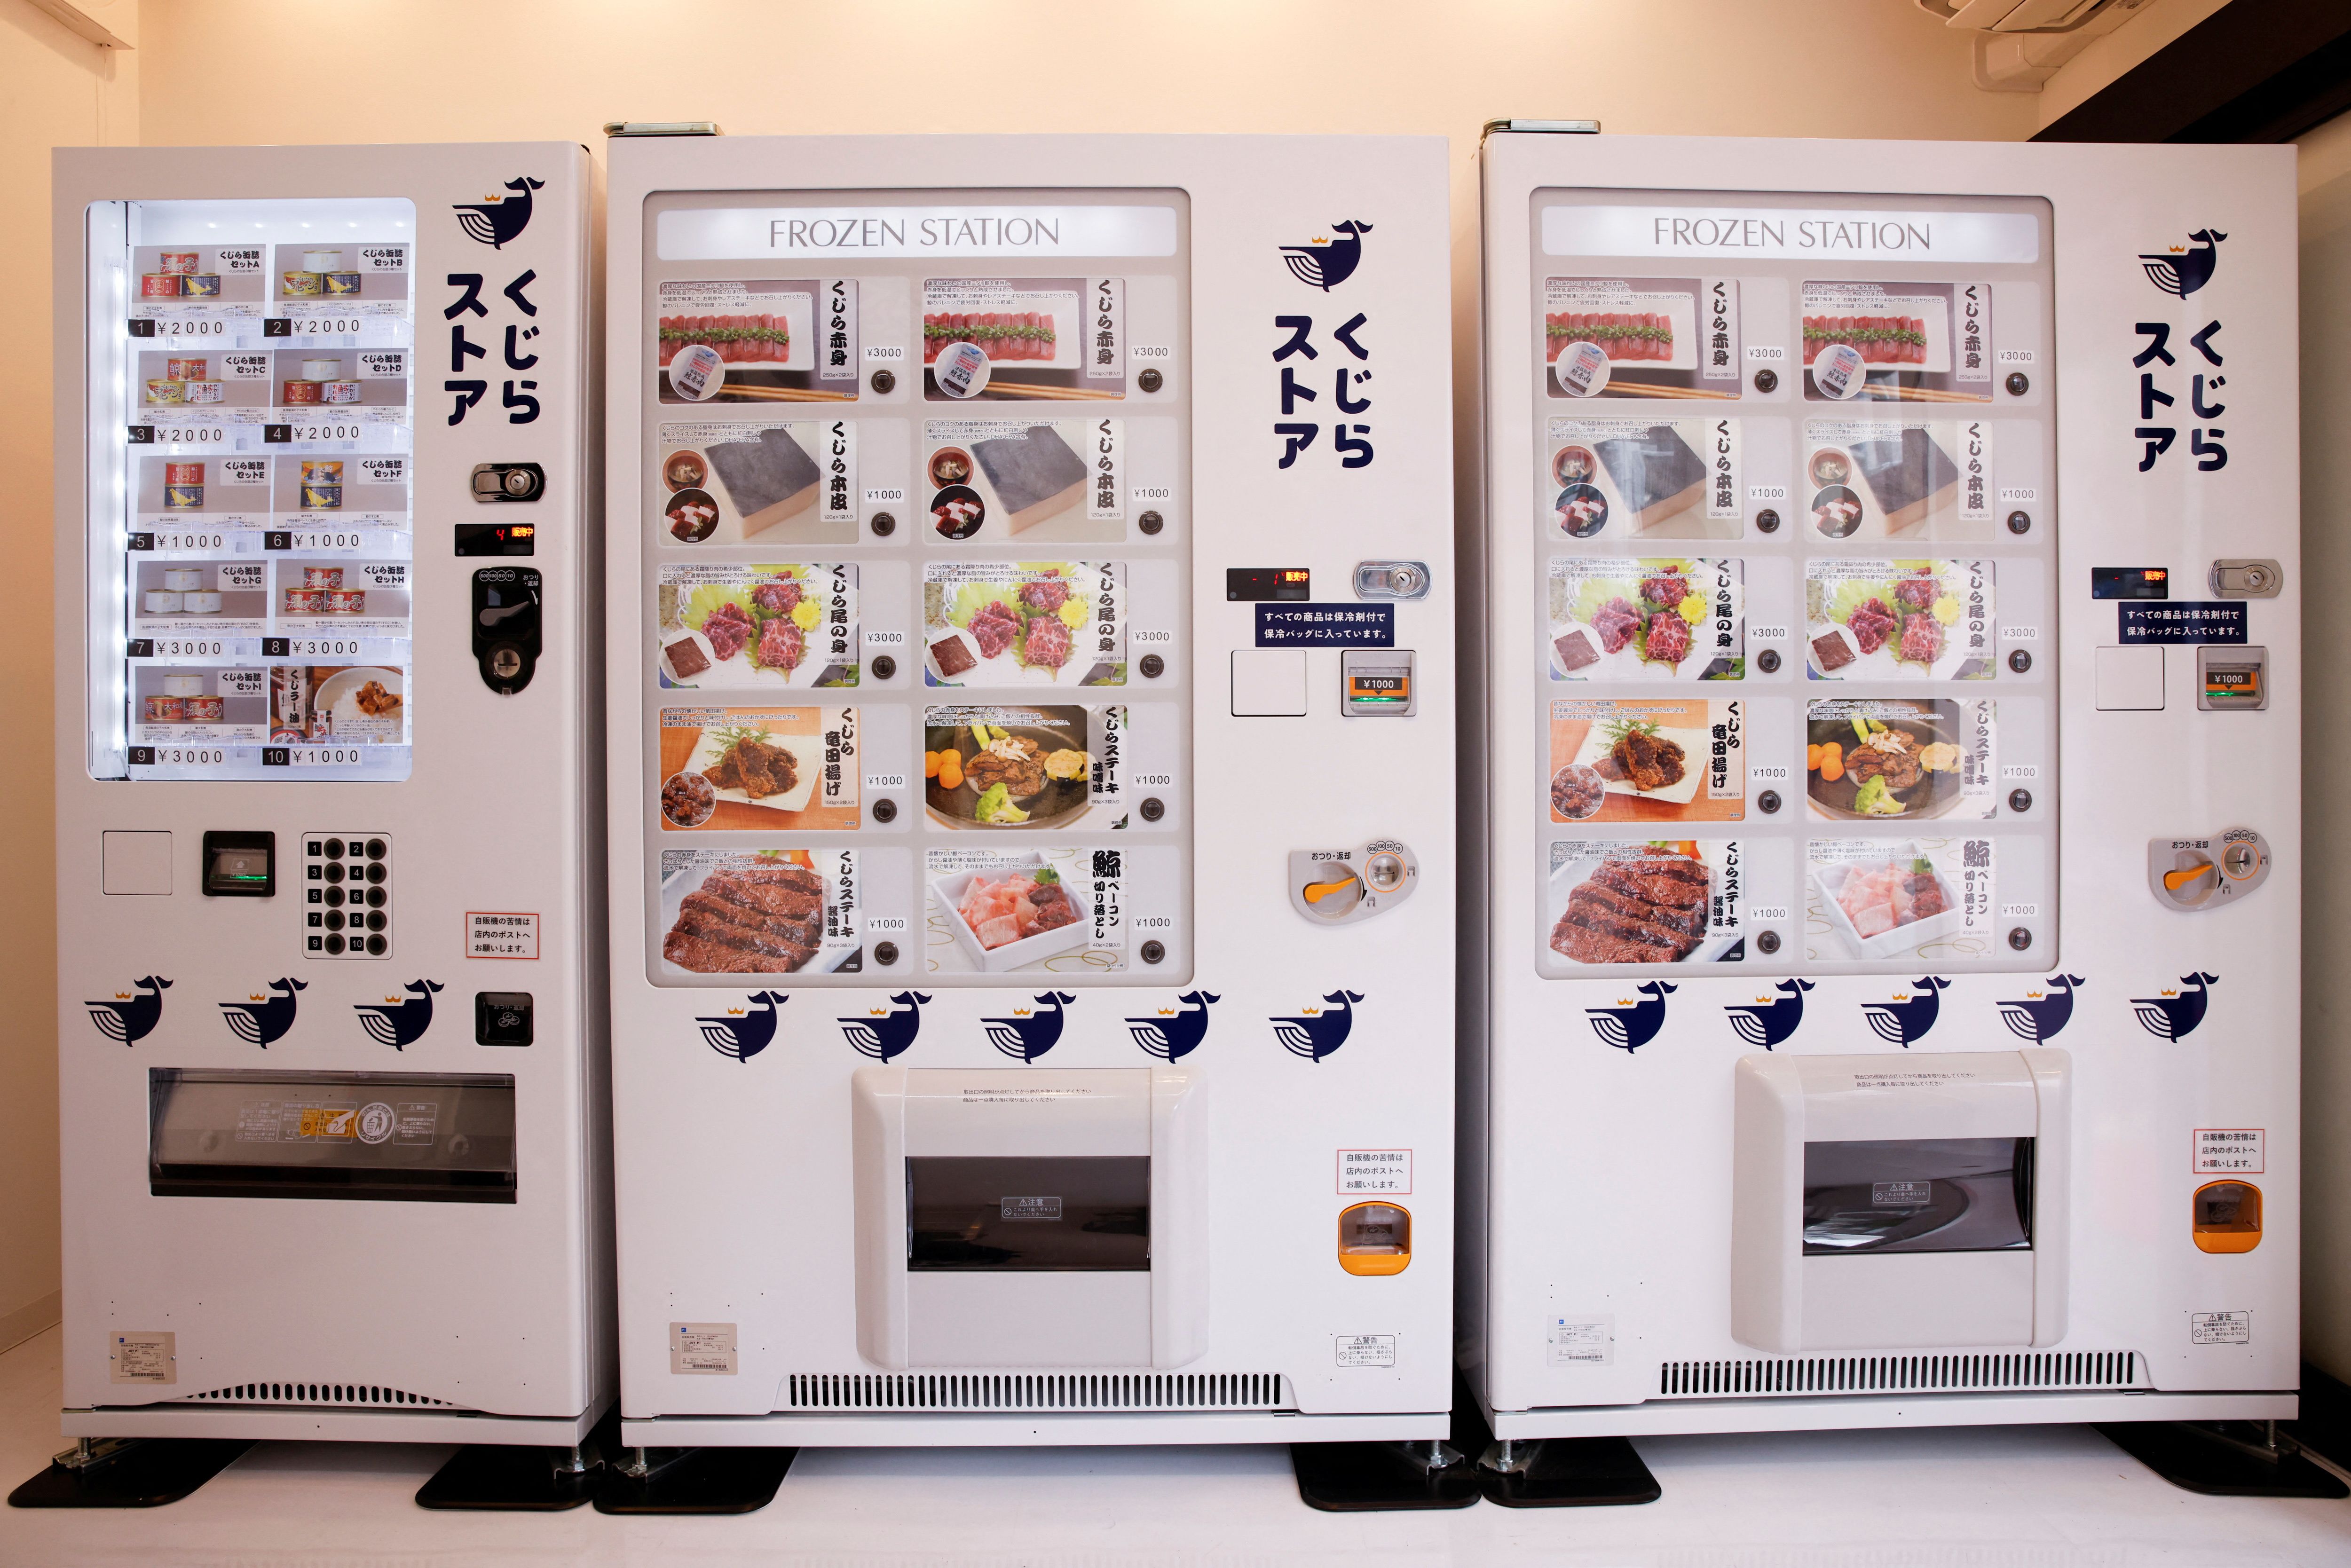 Japan's most iconic vending machine food returns, but without the machines?!?